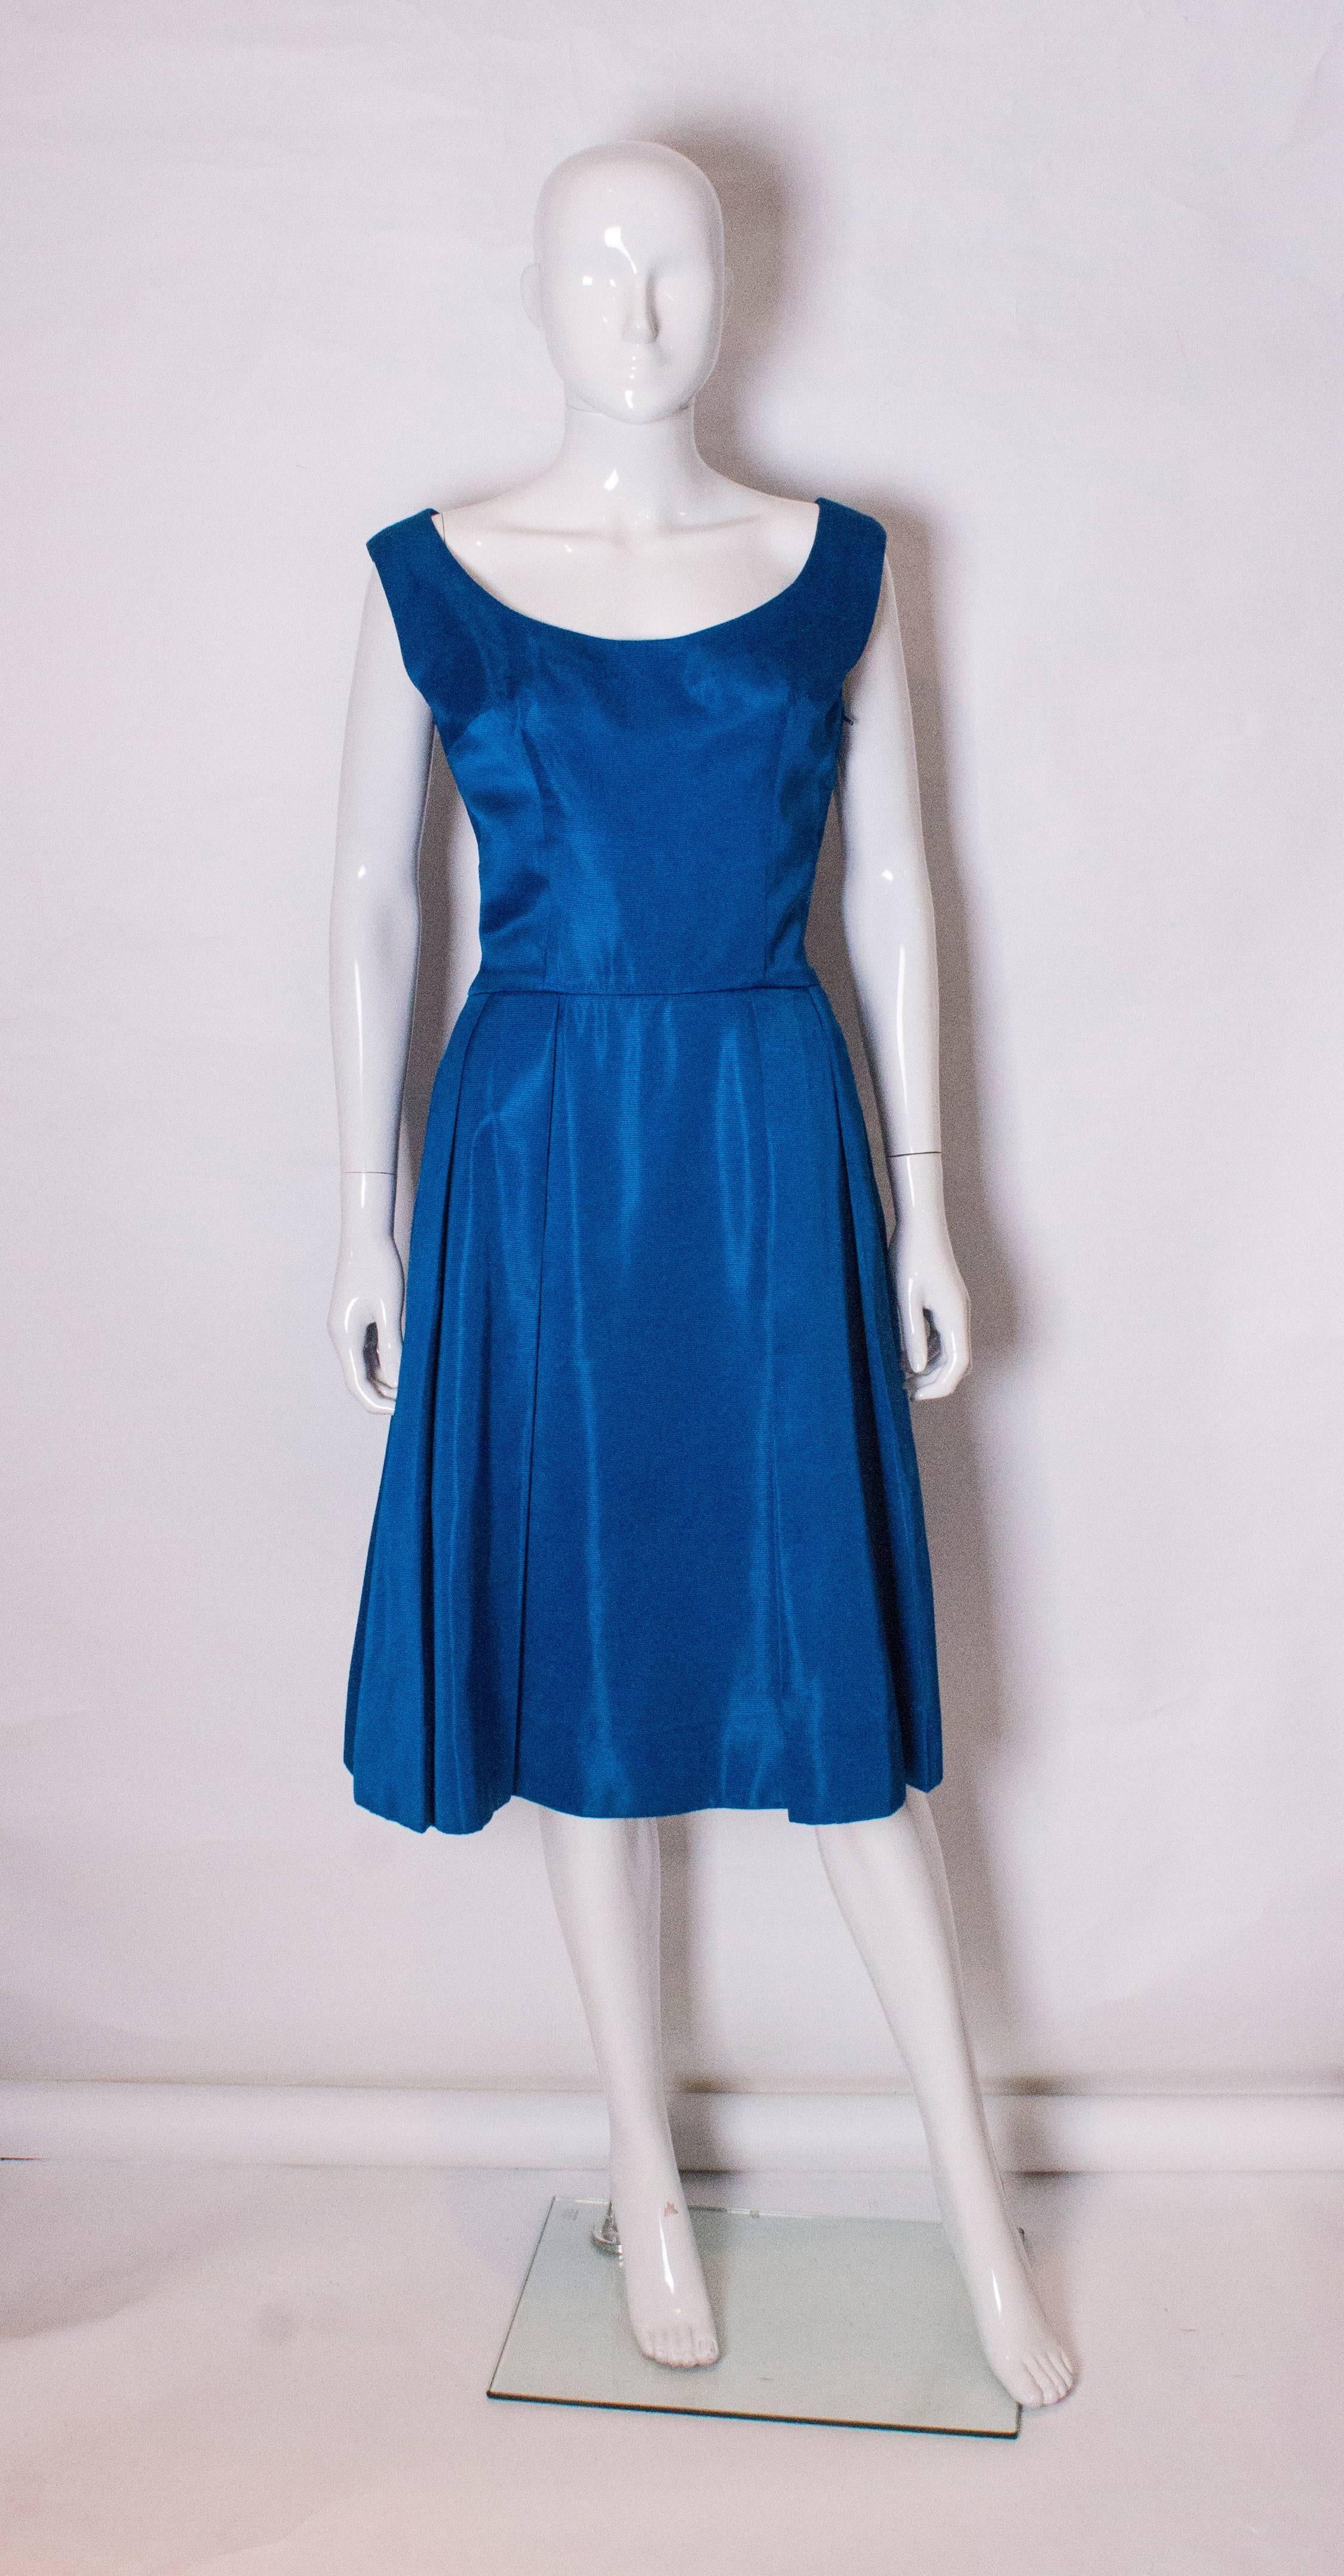 A charming and chic cocktail dress from the 1950's. In a wonderful electric blue colour, the dress has a scoop neckline at the front , and a deep v neckline at the back. The dress has a tail of fabric at the back.